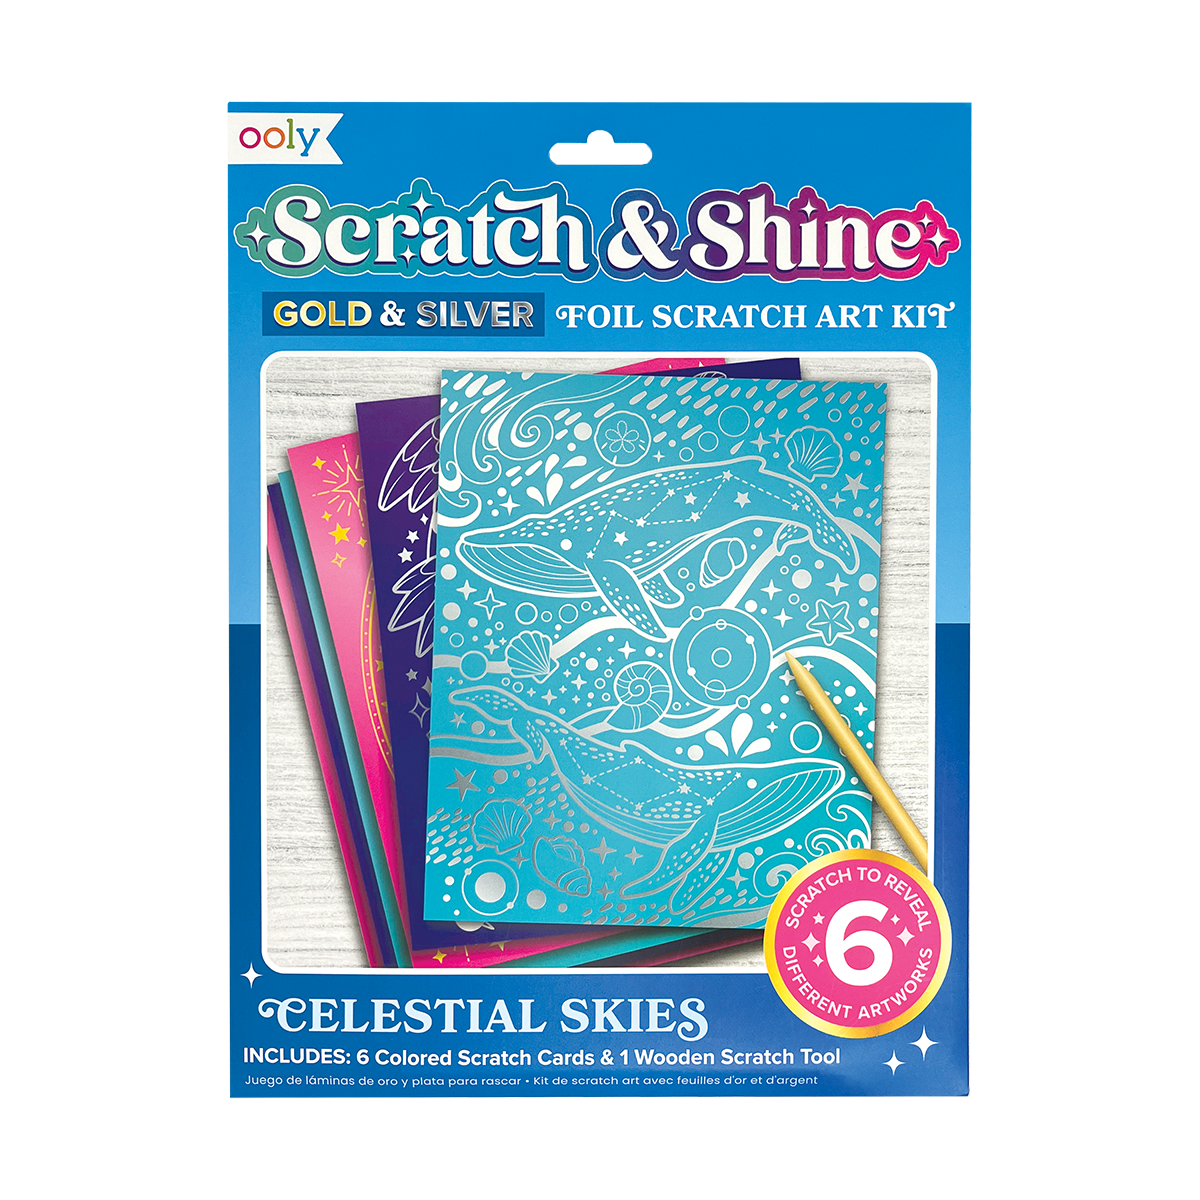 OOLY Scratch and Shine Foil Scratch Art Kit - Celestial Skies in packaging